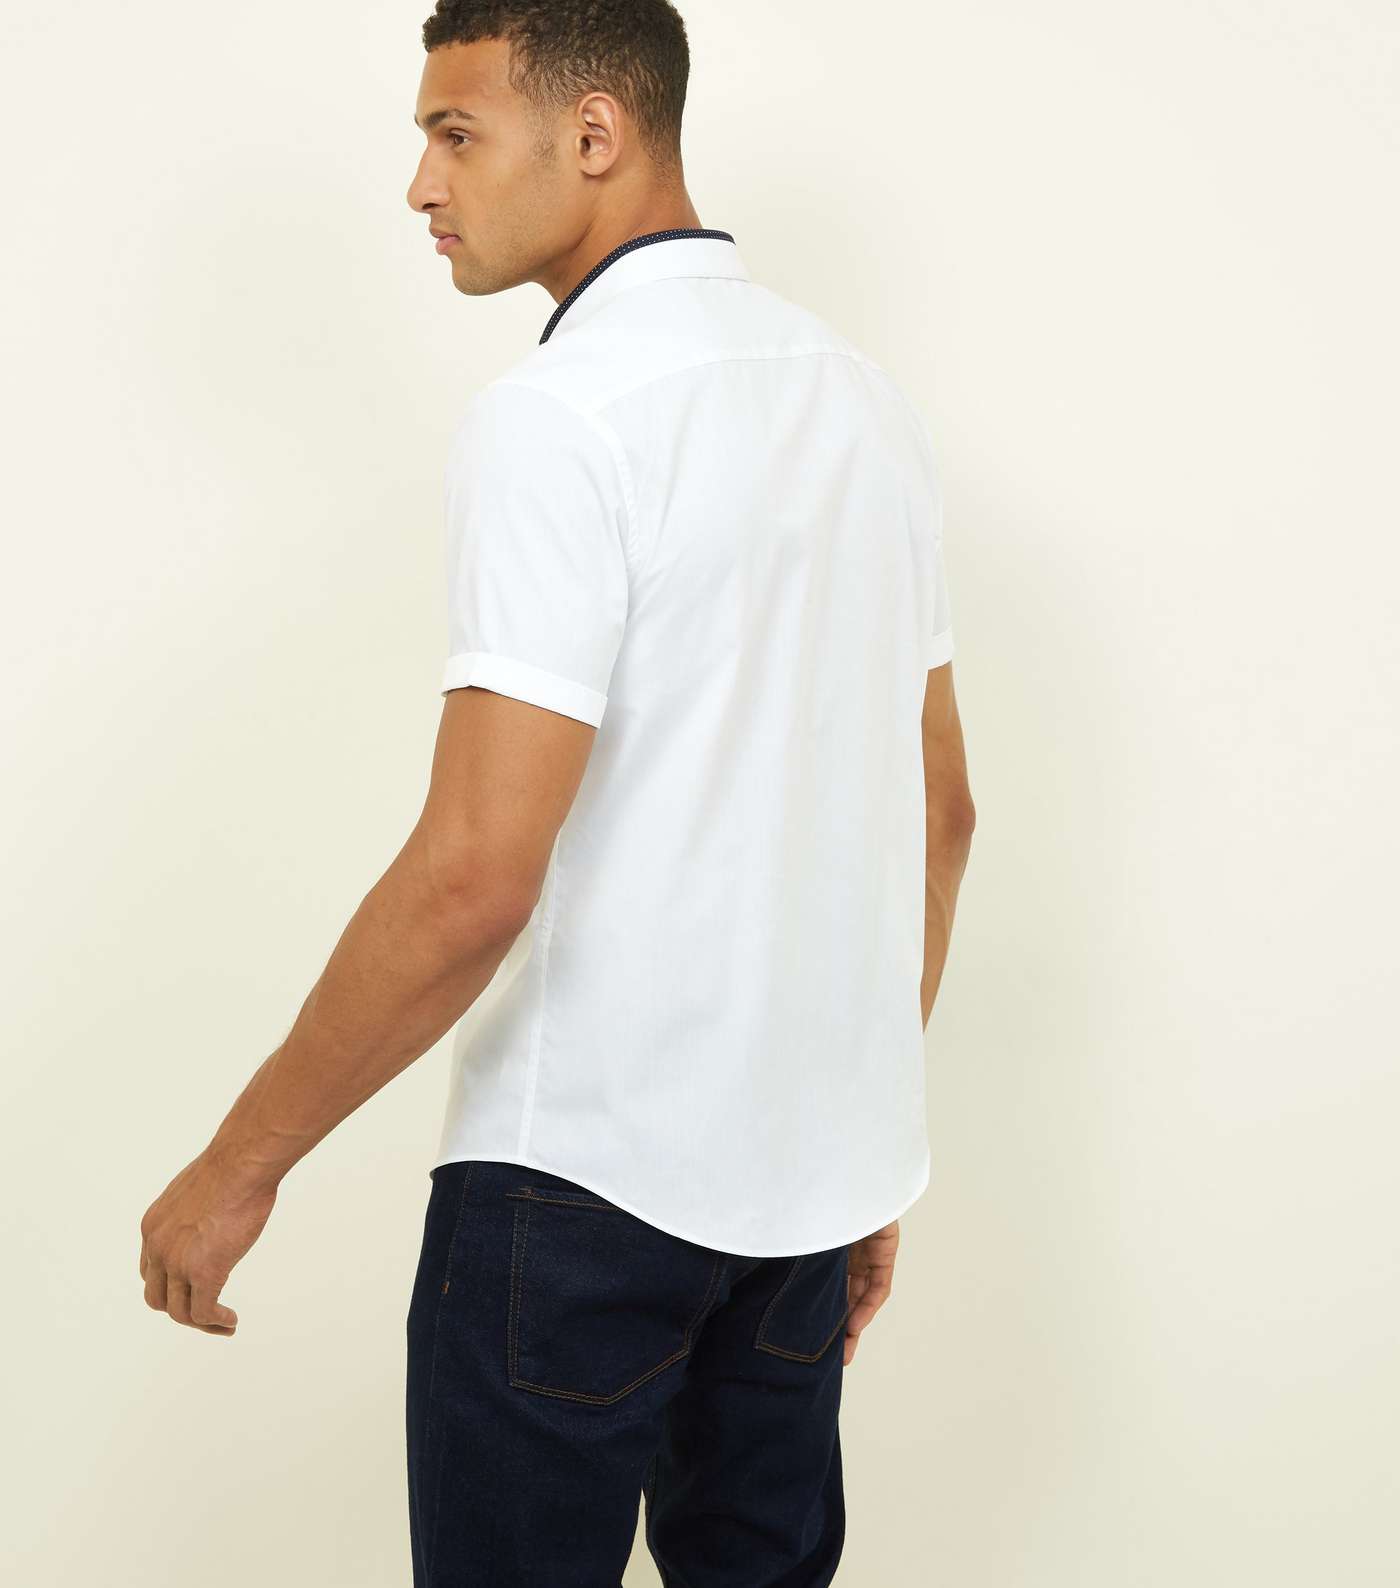 White Contrast Collar Button Down Shirt Image 3